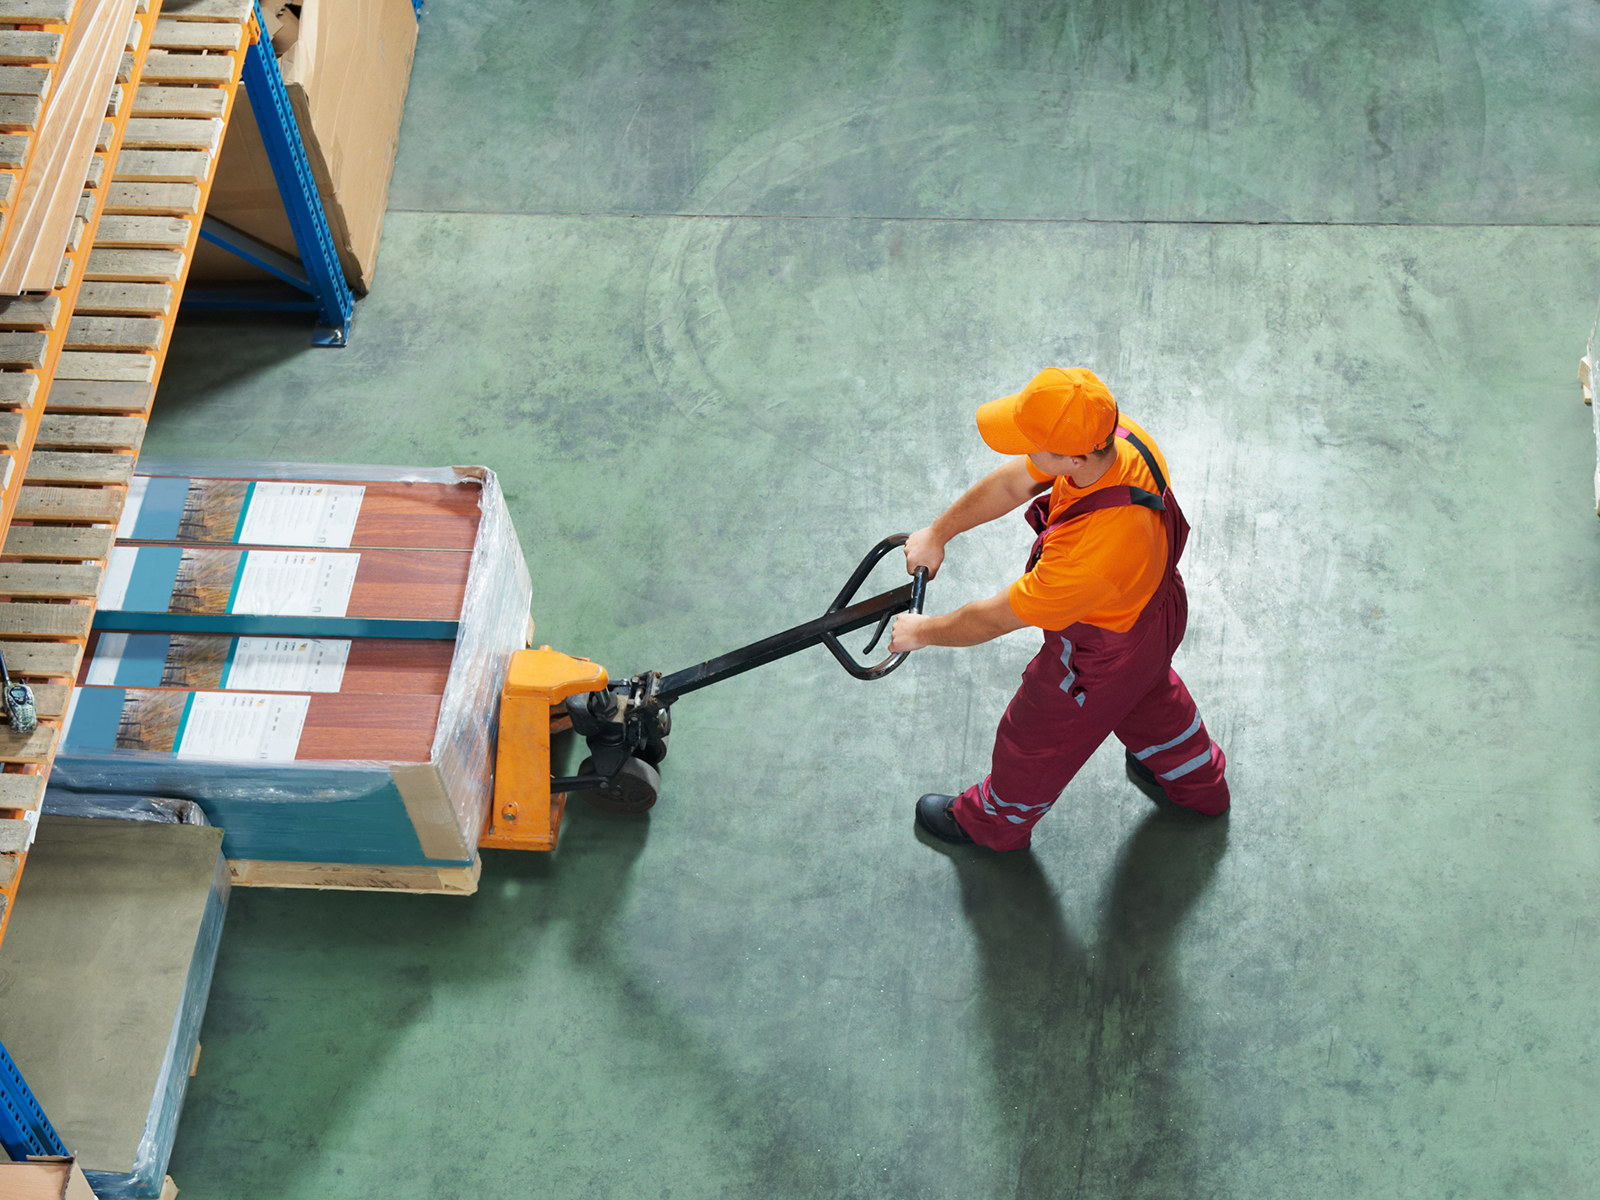 Birds'-eye view of a man in red overalls and a yellow hard hat pushed a pallet of goods into a space in a warehouse.